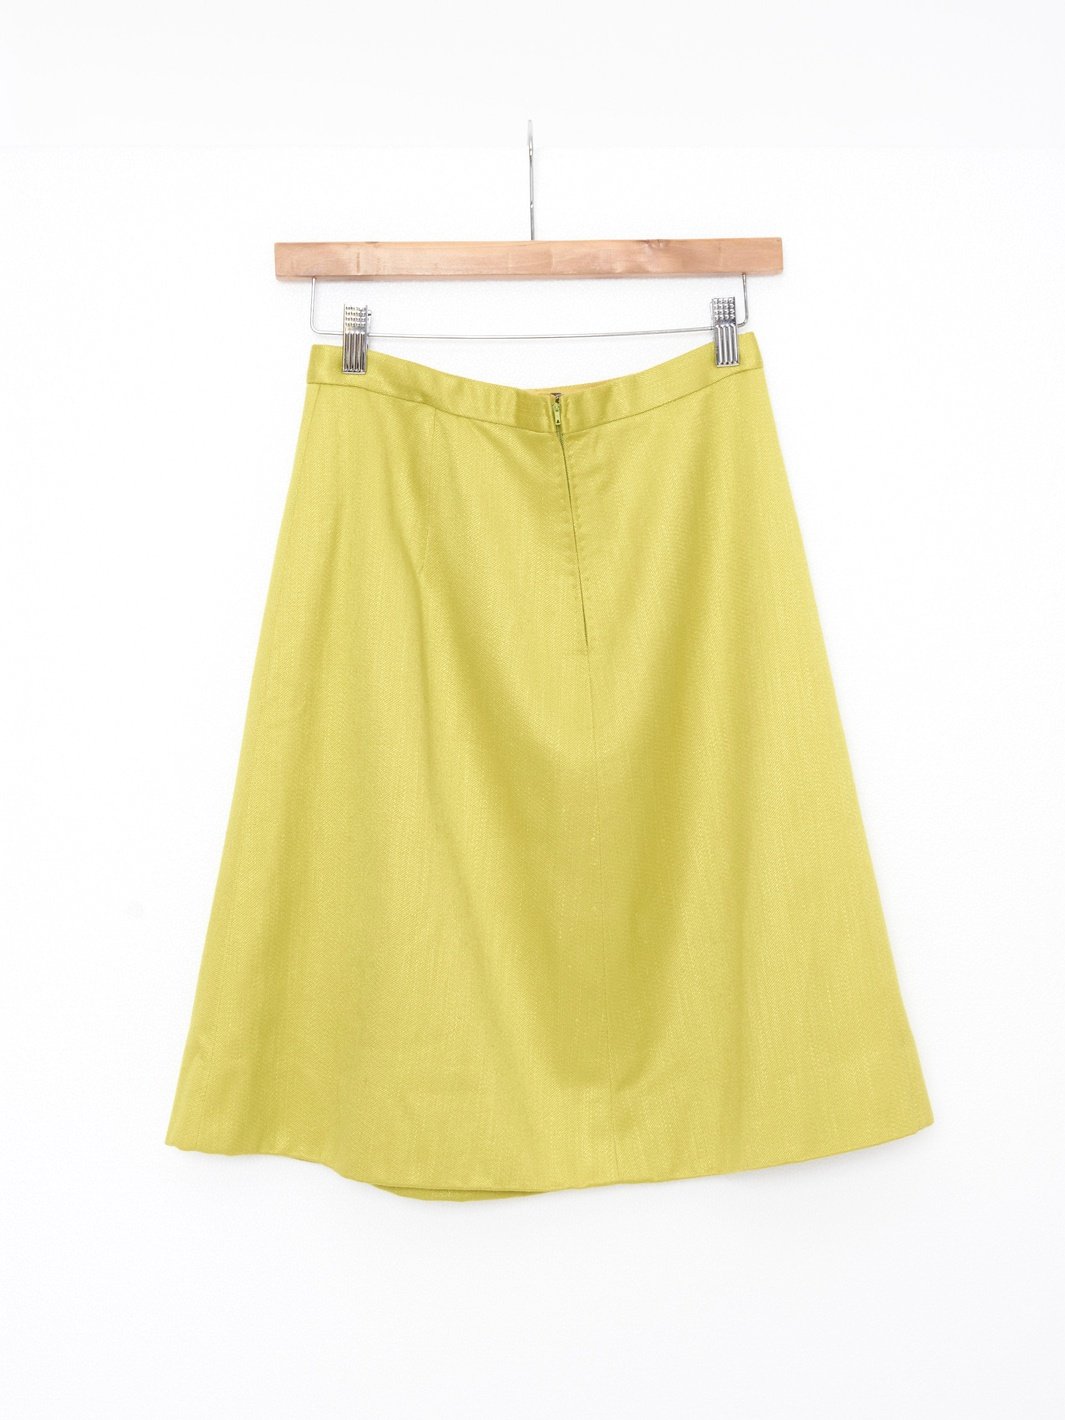 1960s knee-length Gio Caré skirt in lime green cotton